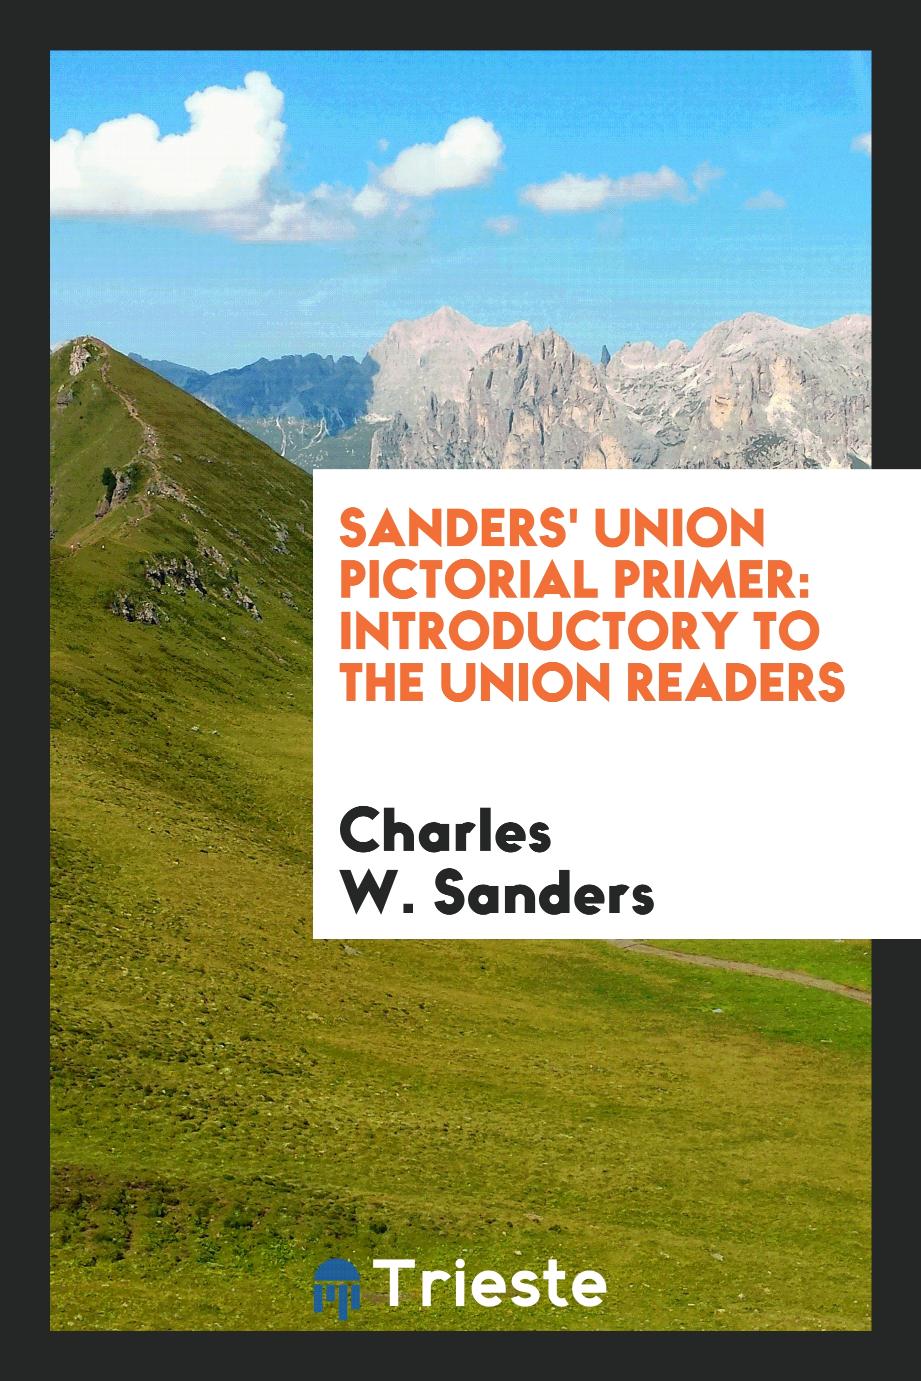 Sanders' Union Pictorial Primer: Introductory to the Union Readers